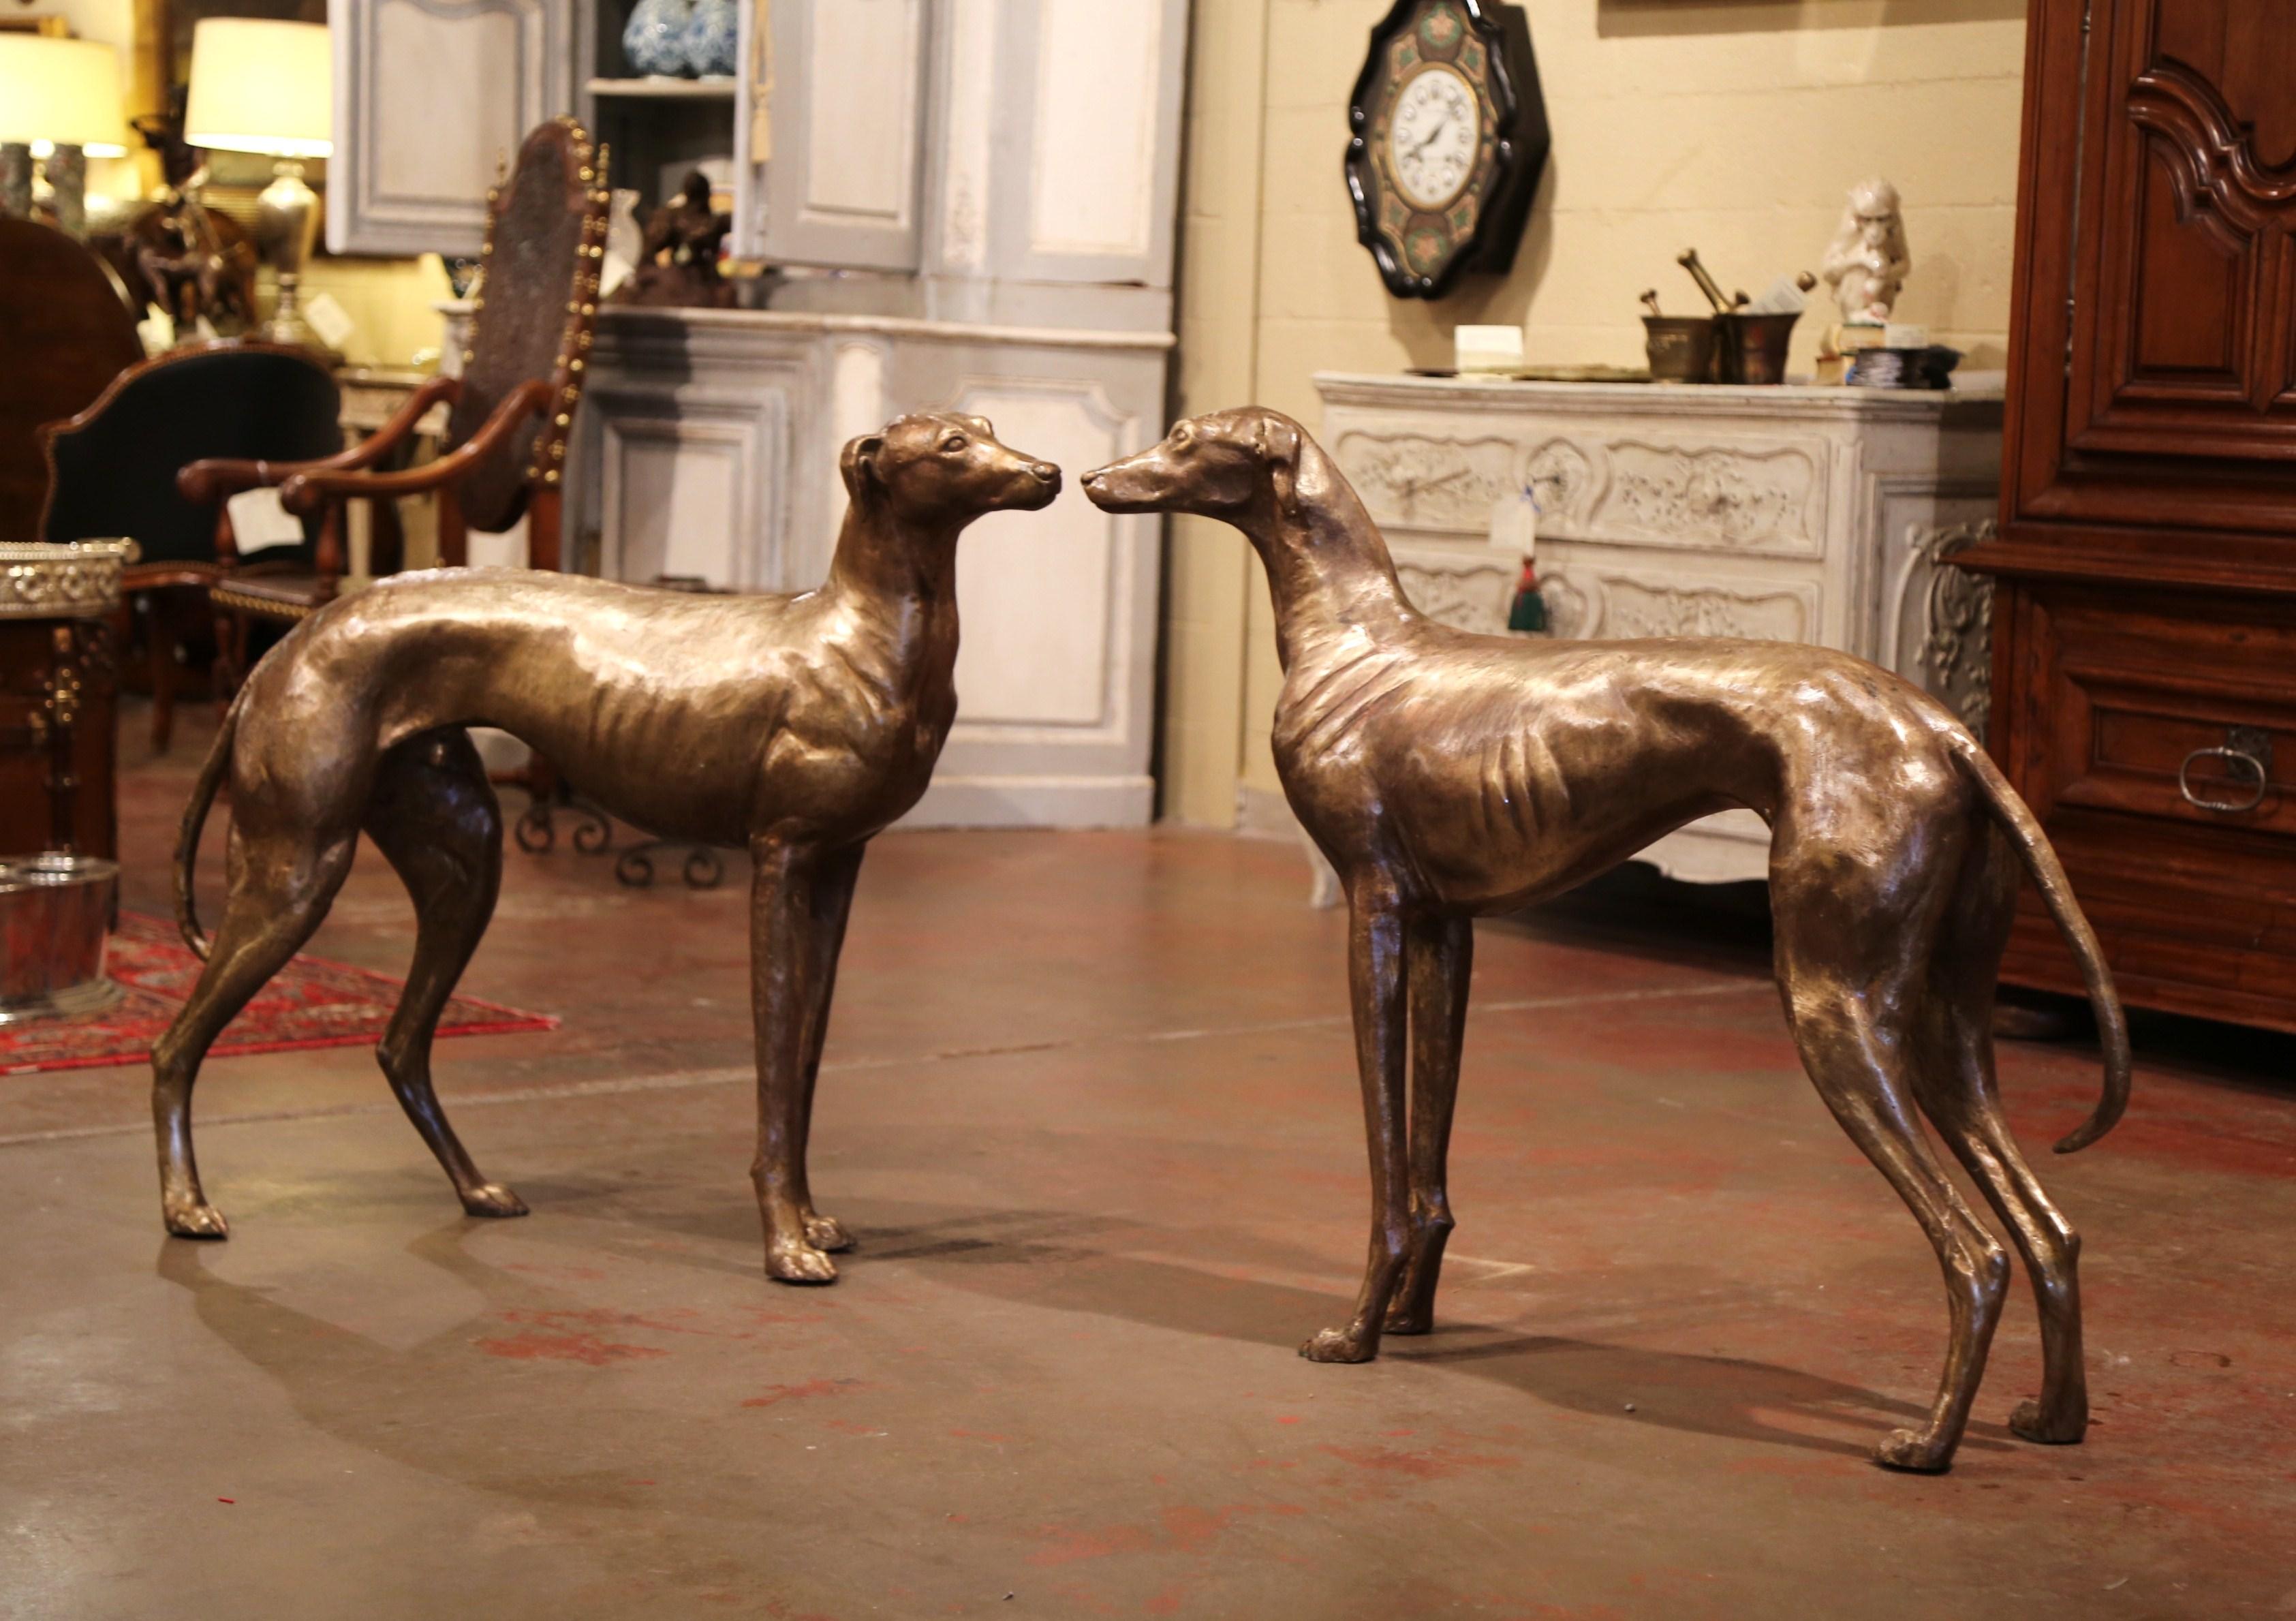 These tall Classic dog sculptures were crafted in France, circa 1960. Made of bronze, the stately, vintage Greyhounds have wonderful expression with great details. The sculpted canines have a weathered patinated finish and could be used inside or